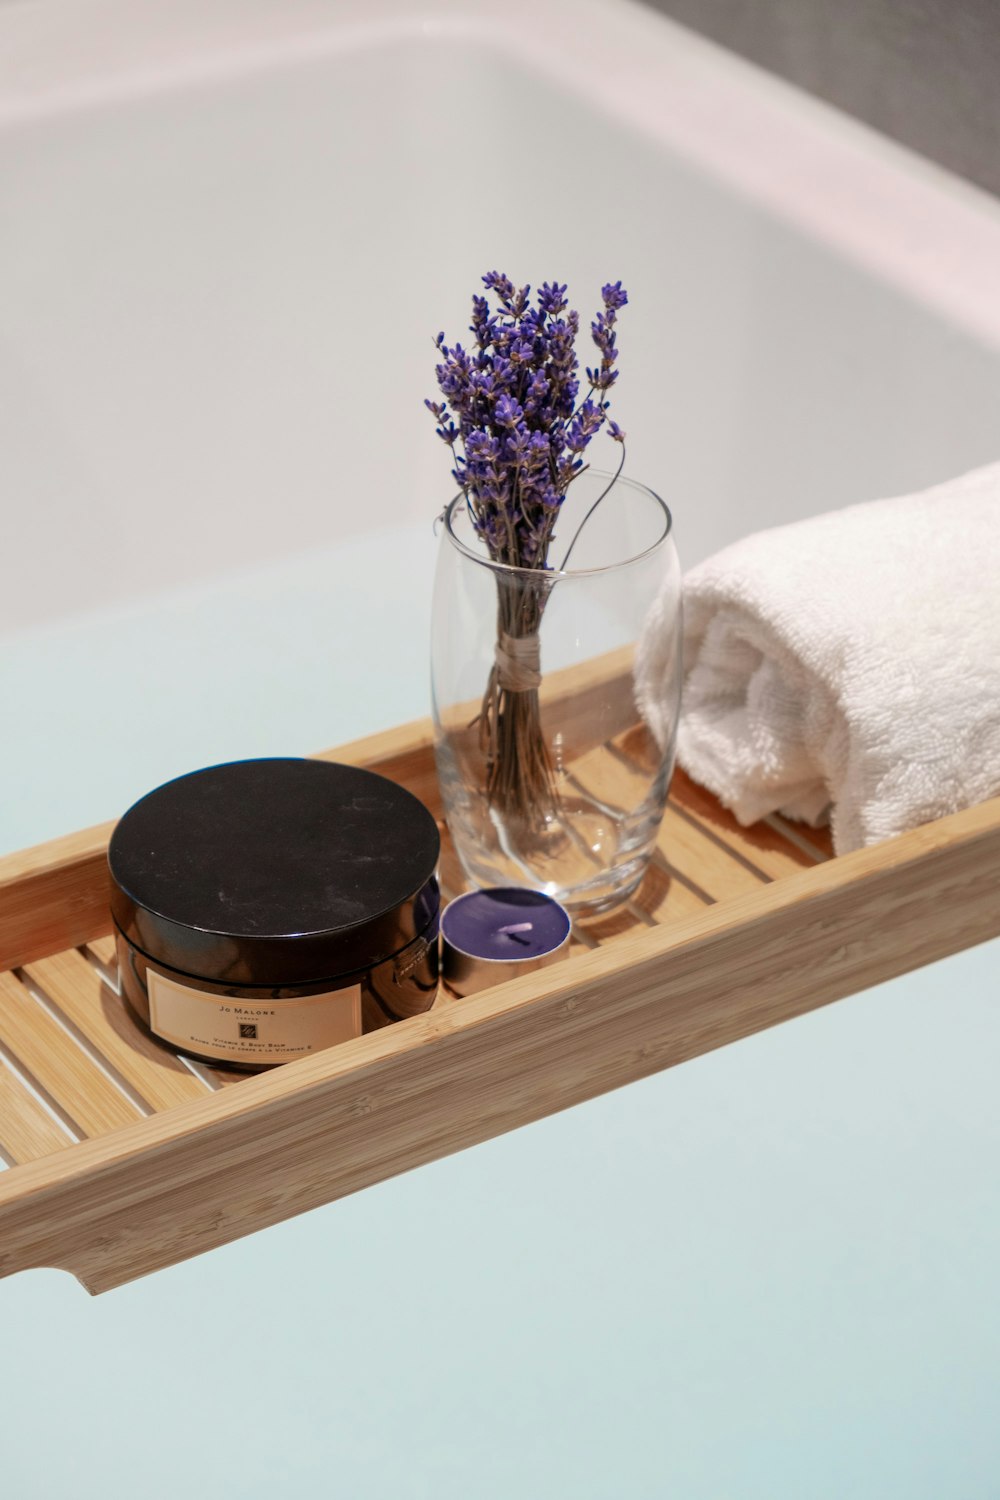 a wooden tray with a vase of flowers and a towel on it